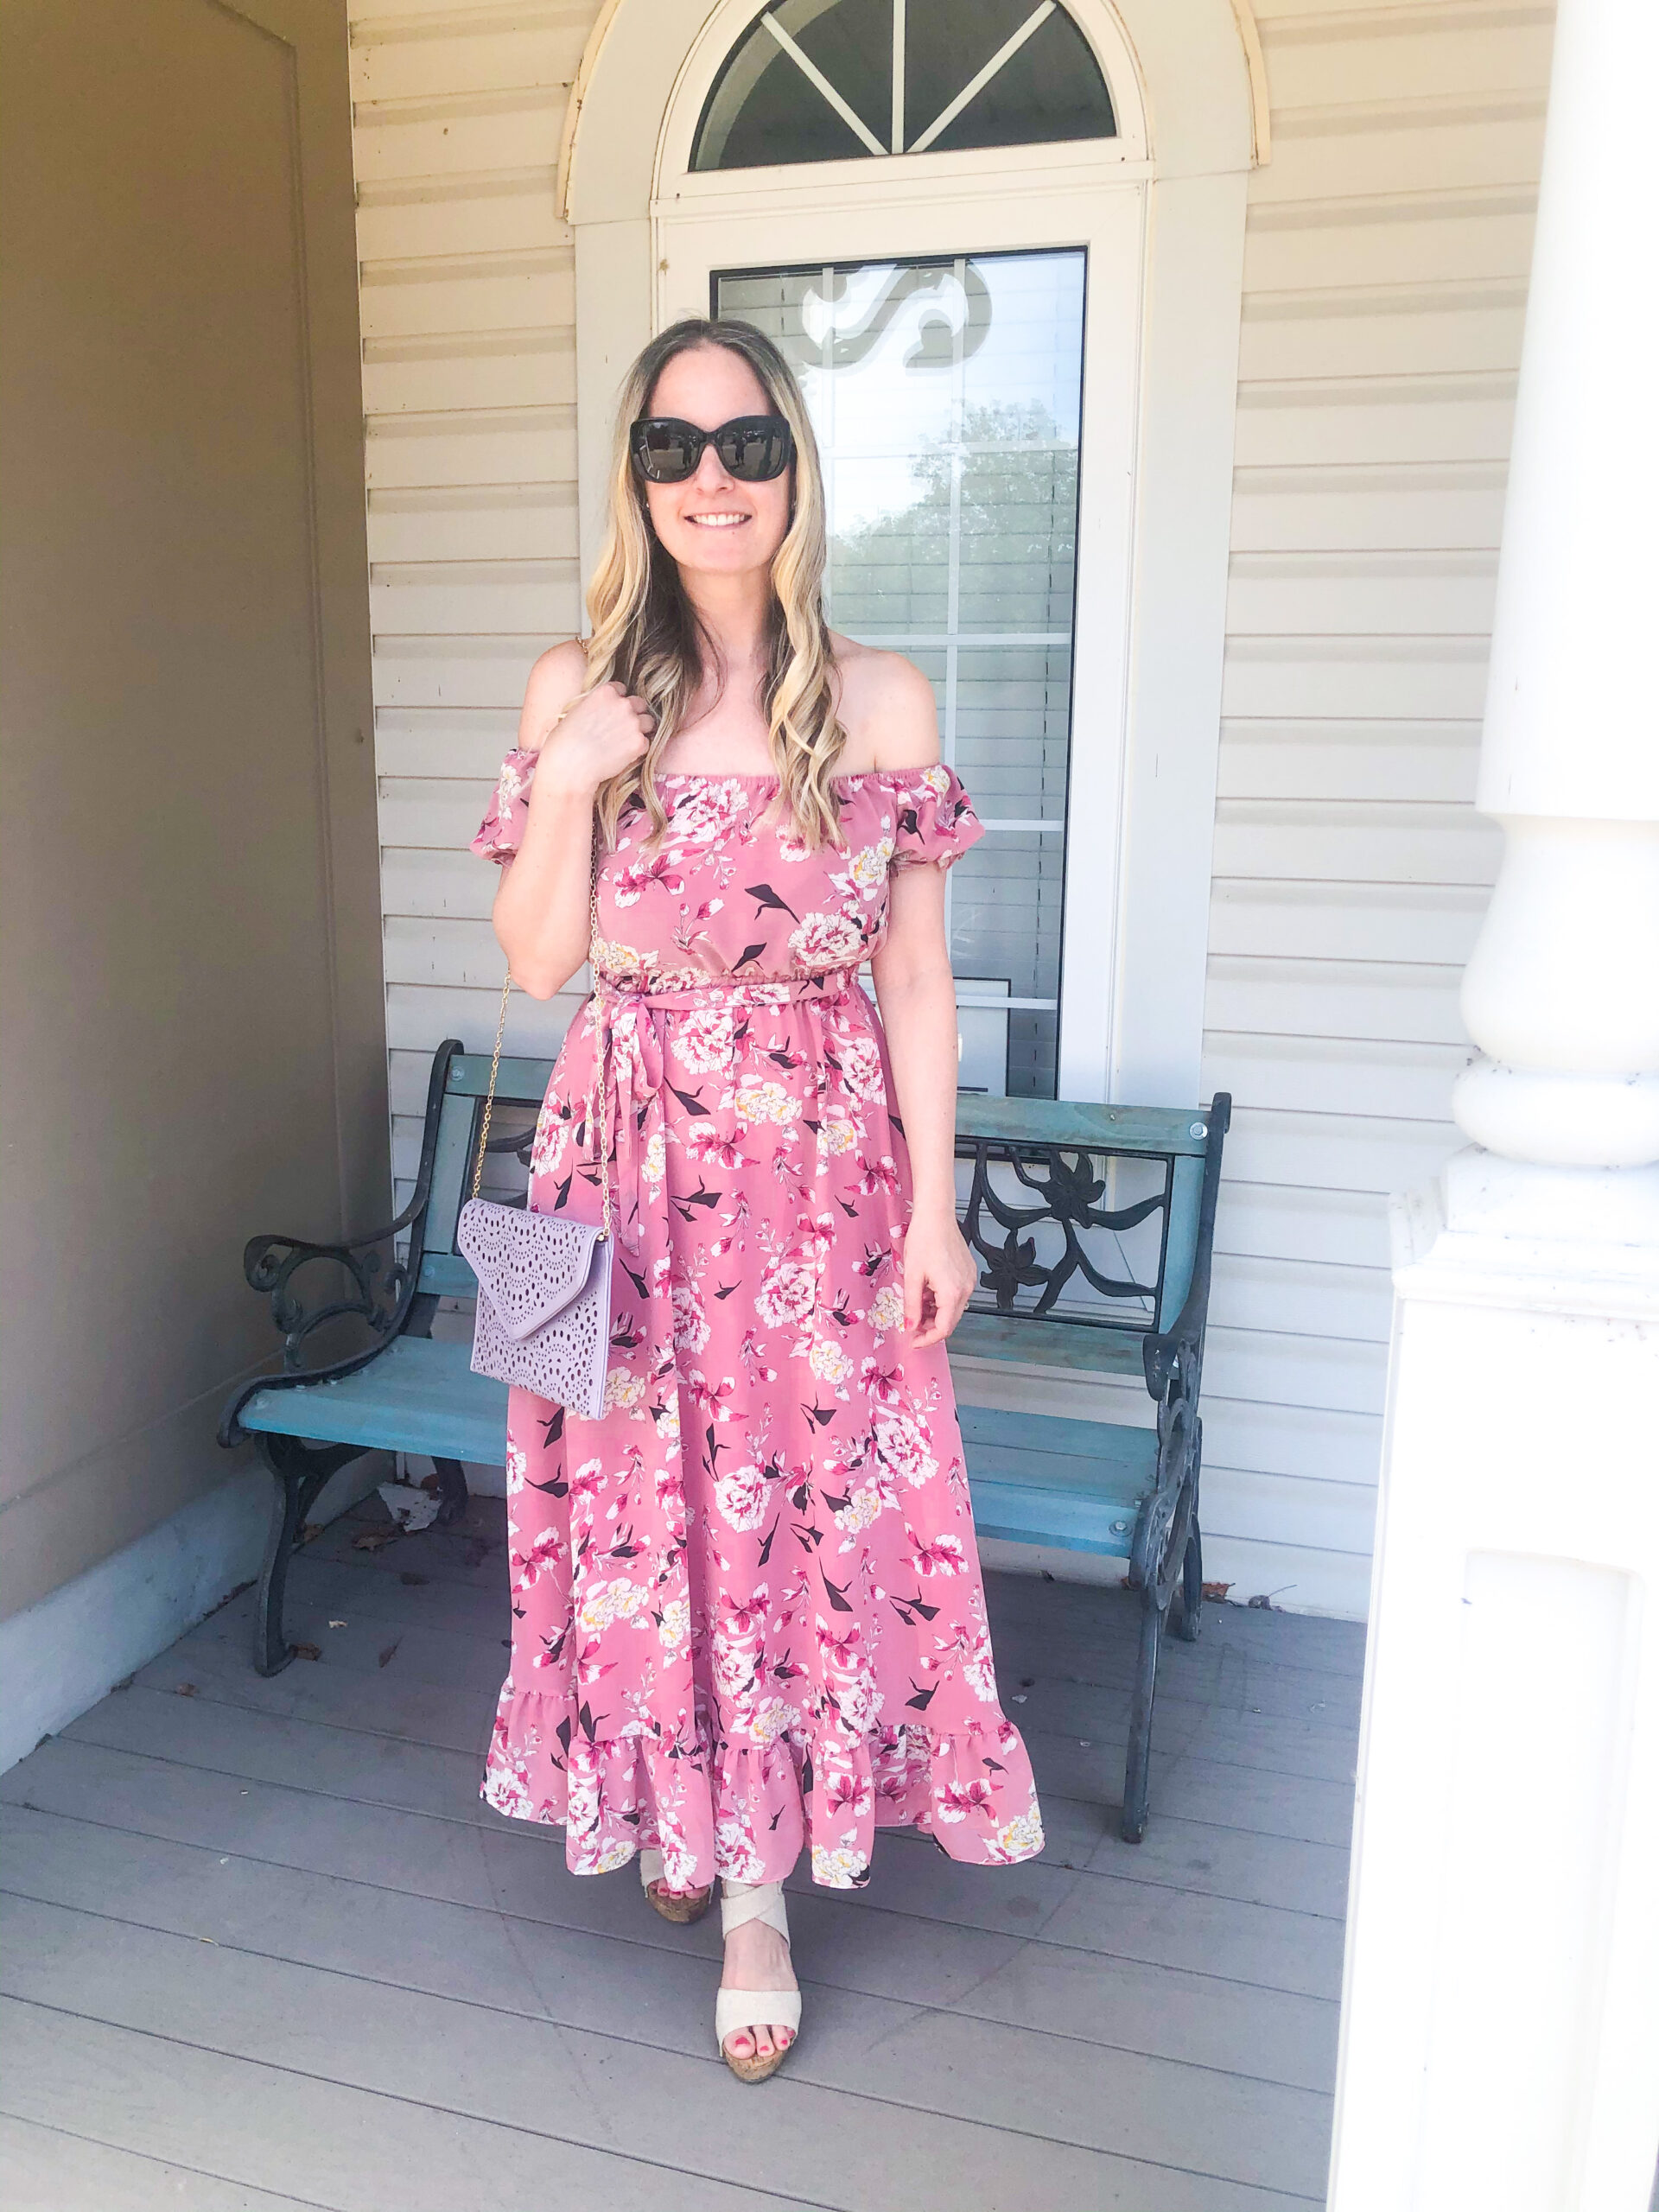 Shein pink floral off the shoulder dress on Livin' Life with Style 